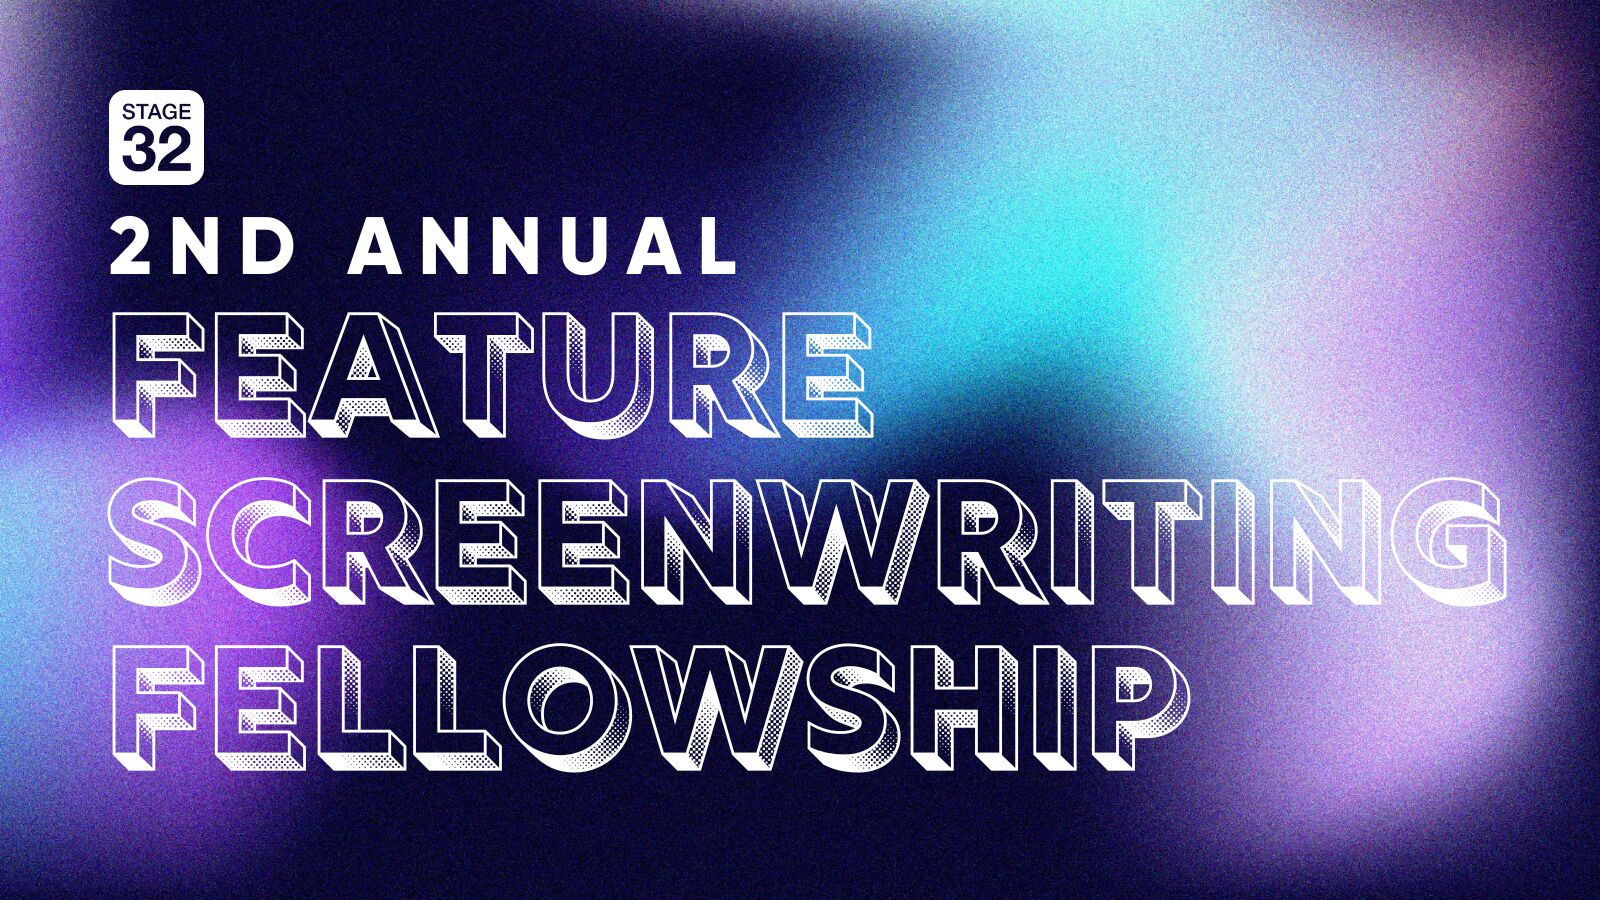 2nd Annual Feature Screenwriting Fellowship Competition